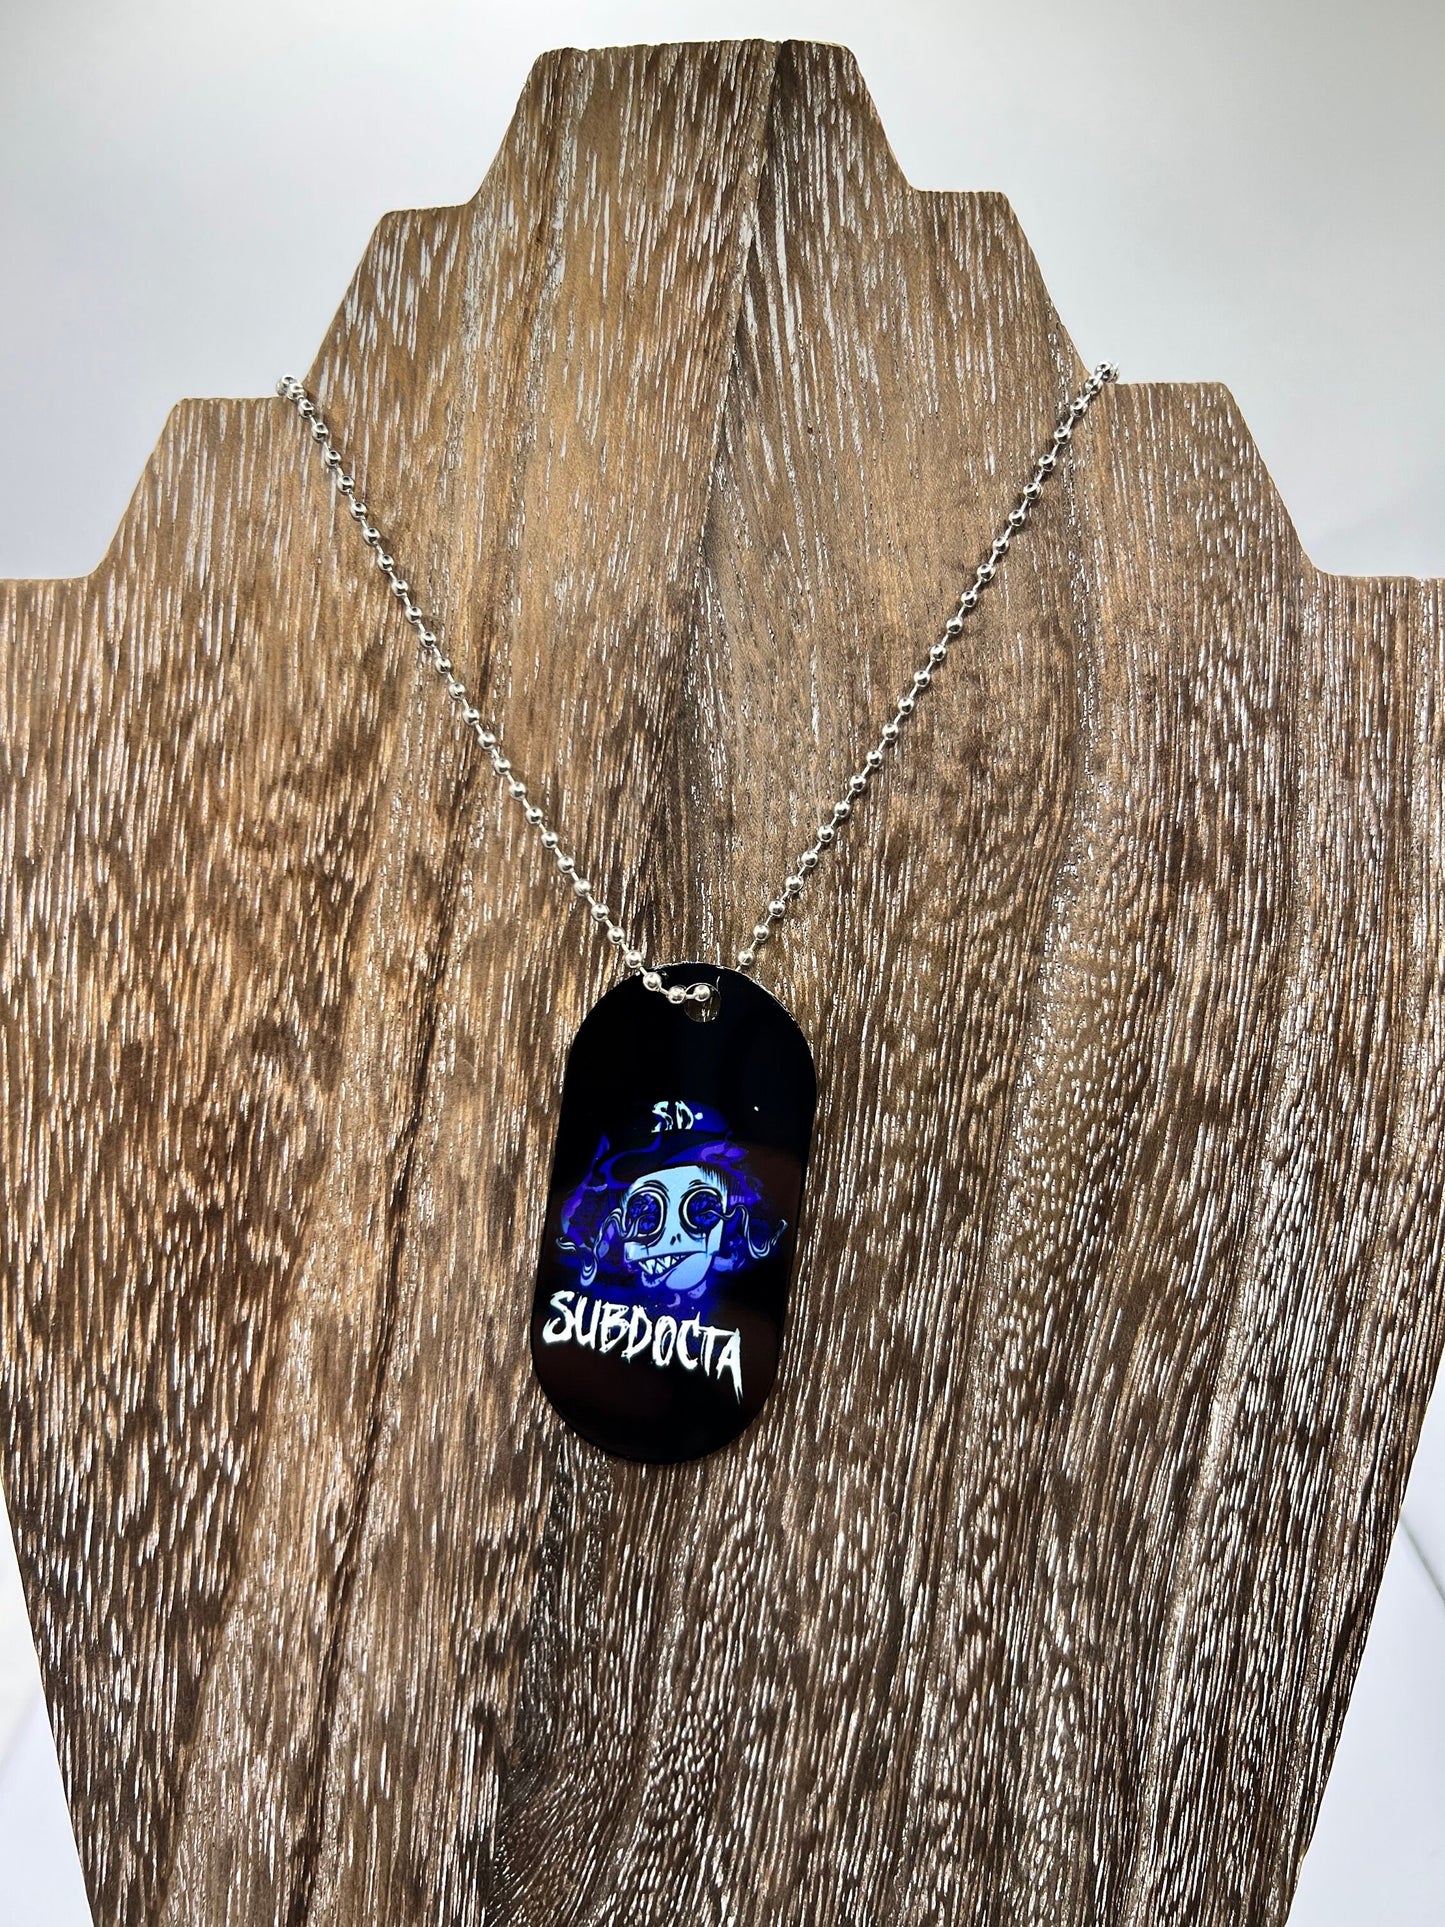 Subdocta  double sided Necklace Dogtag Chain  Dubstep Rave EDM DJ Producer Bass trippy wubz Wook vibe peace love